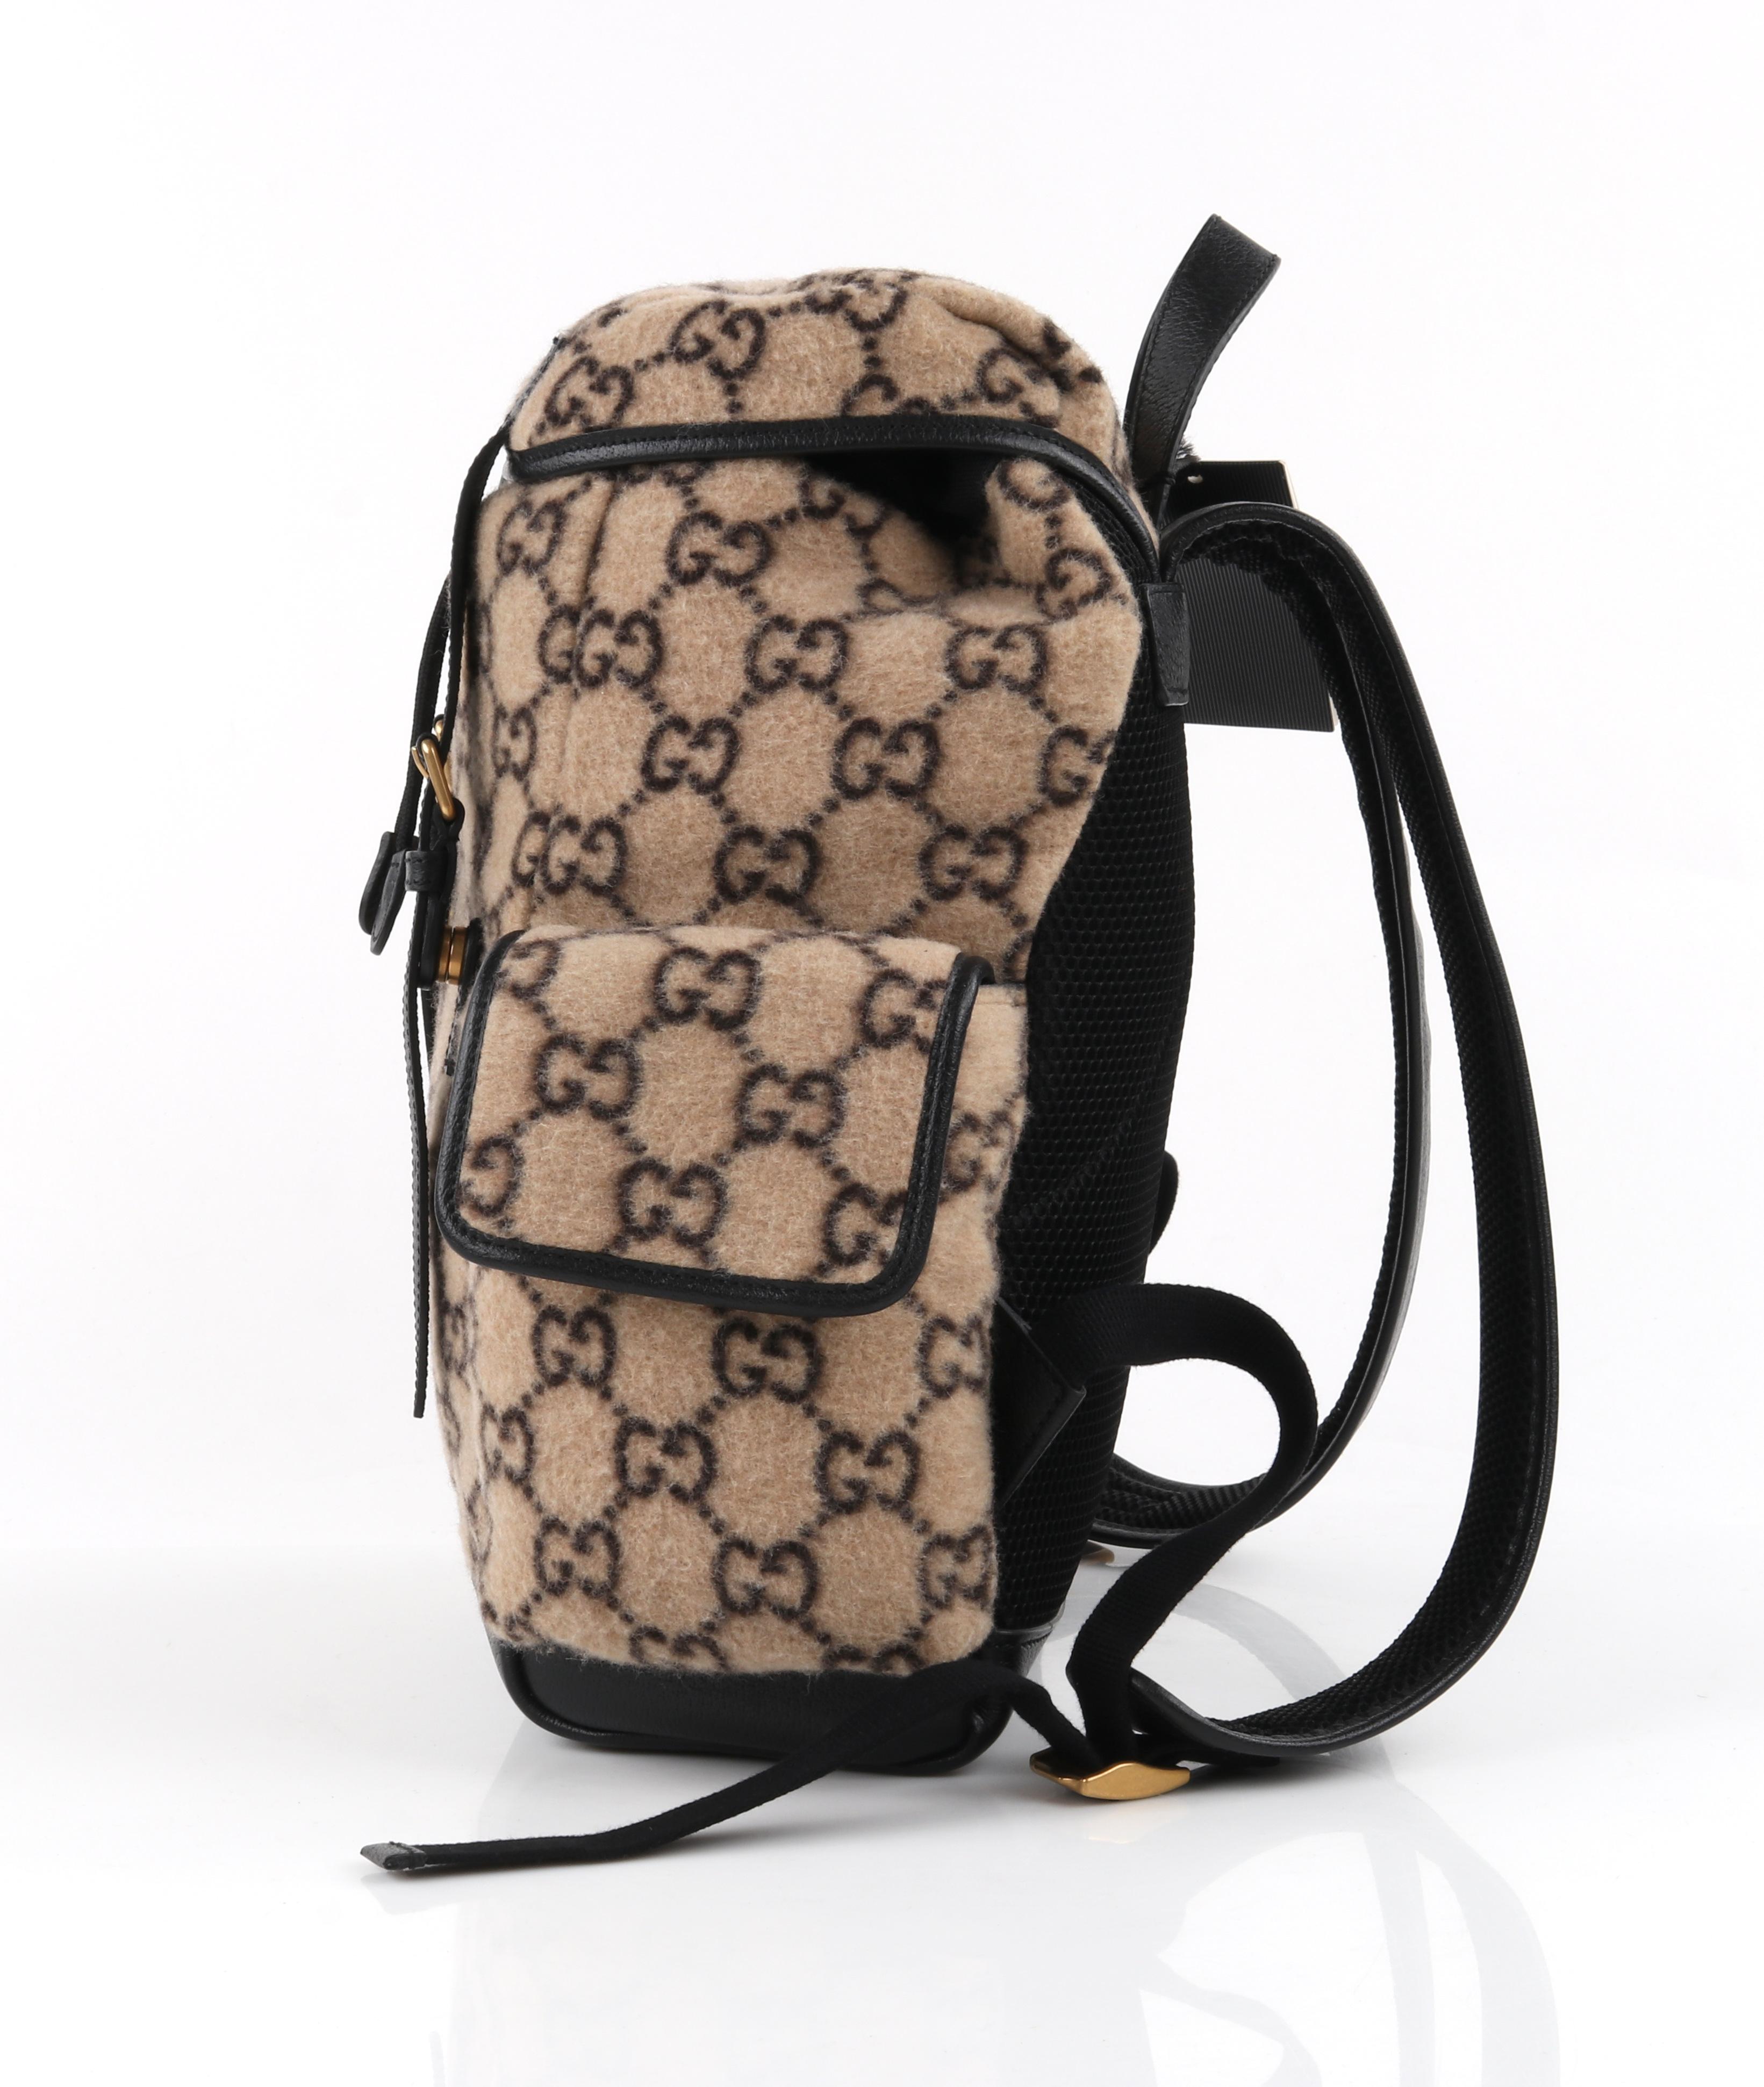 GUCCI 2019 Black Beige Monogram Jacquard Wool Drawstring Buckle Backpack NWT In Excellent Condition For Sale In Thiensville, WI